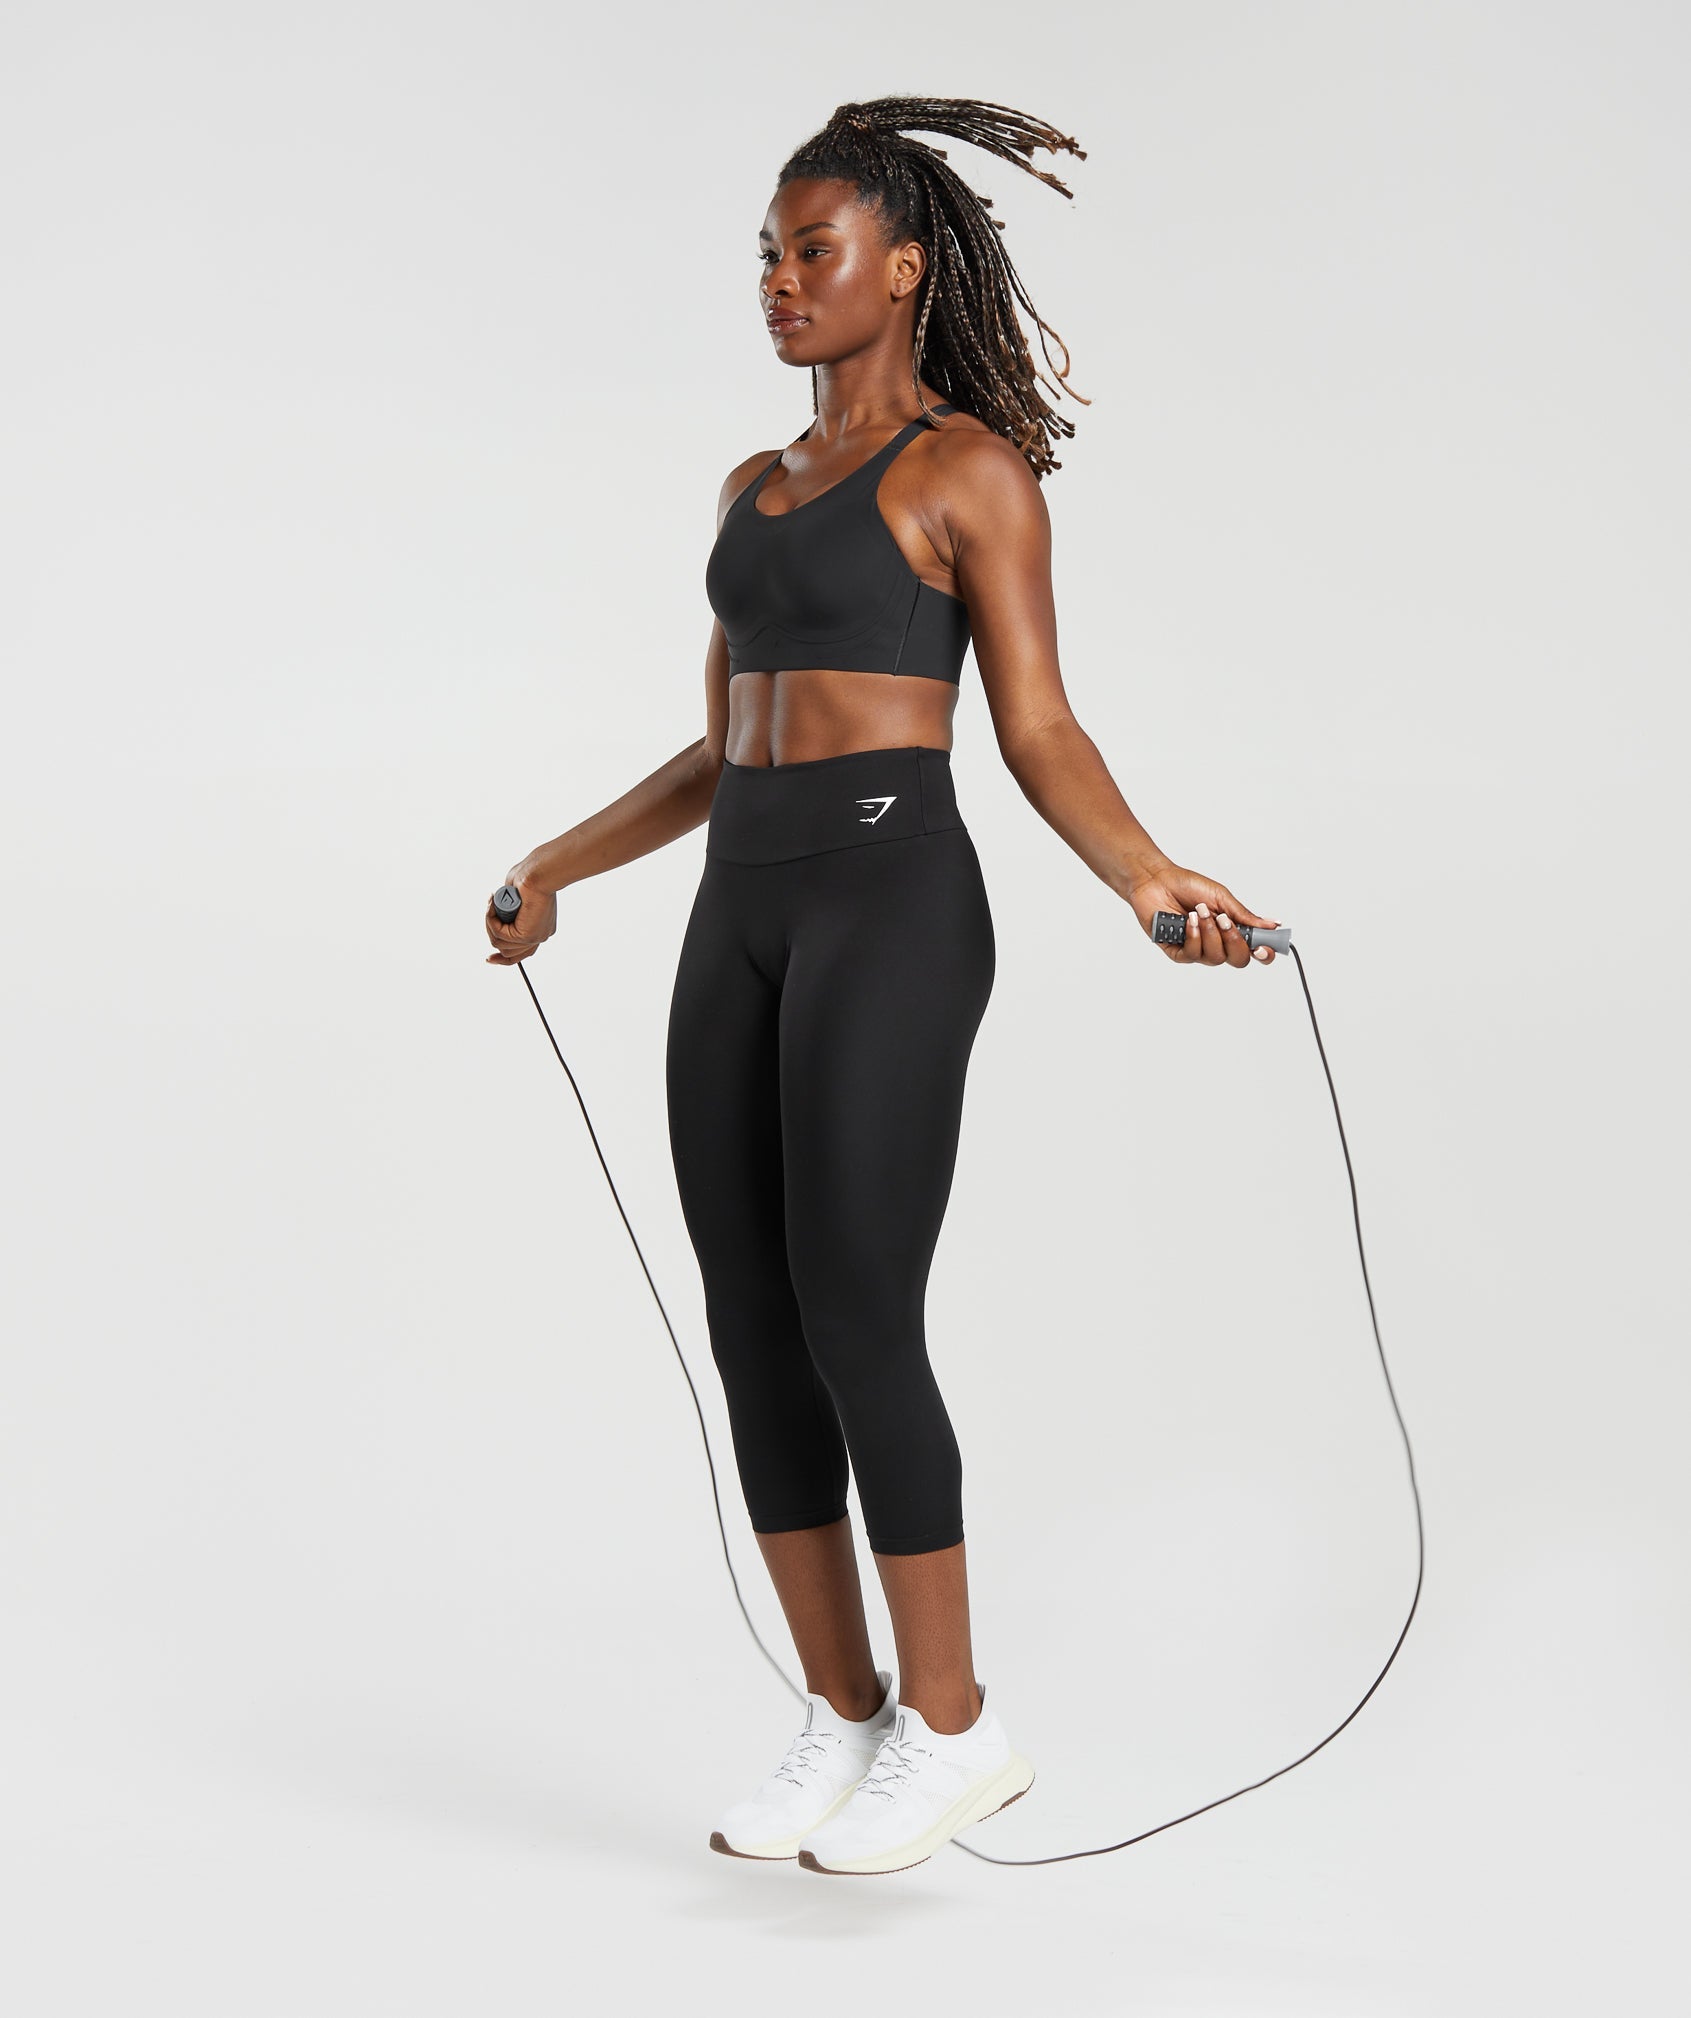 High Impact & High Support Sports Bras – Comfy & Supportive